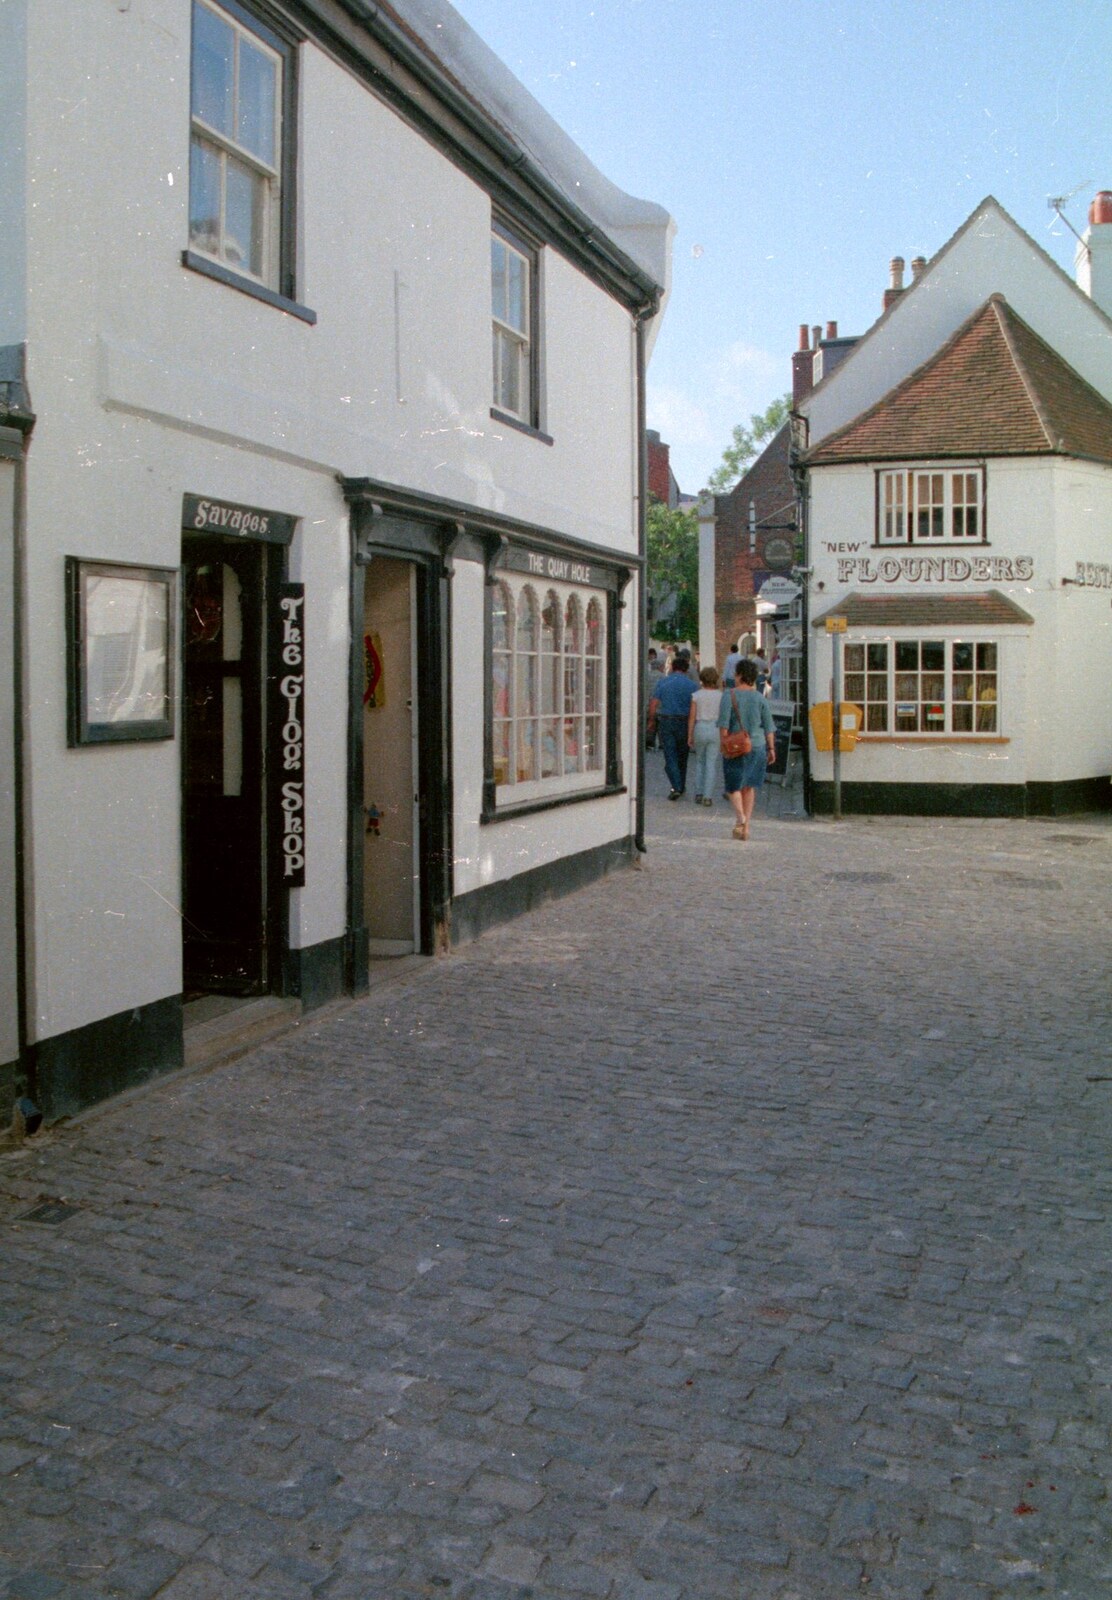 Down by the quay in Lymington from Harvester Way Randomness, Lymington, Hampshire - 19th July 1986